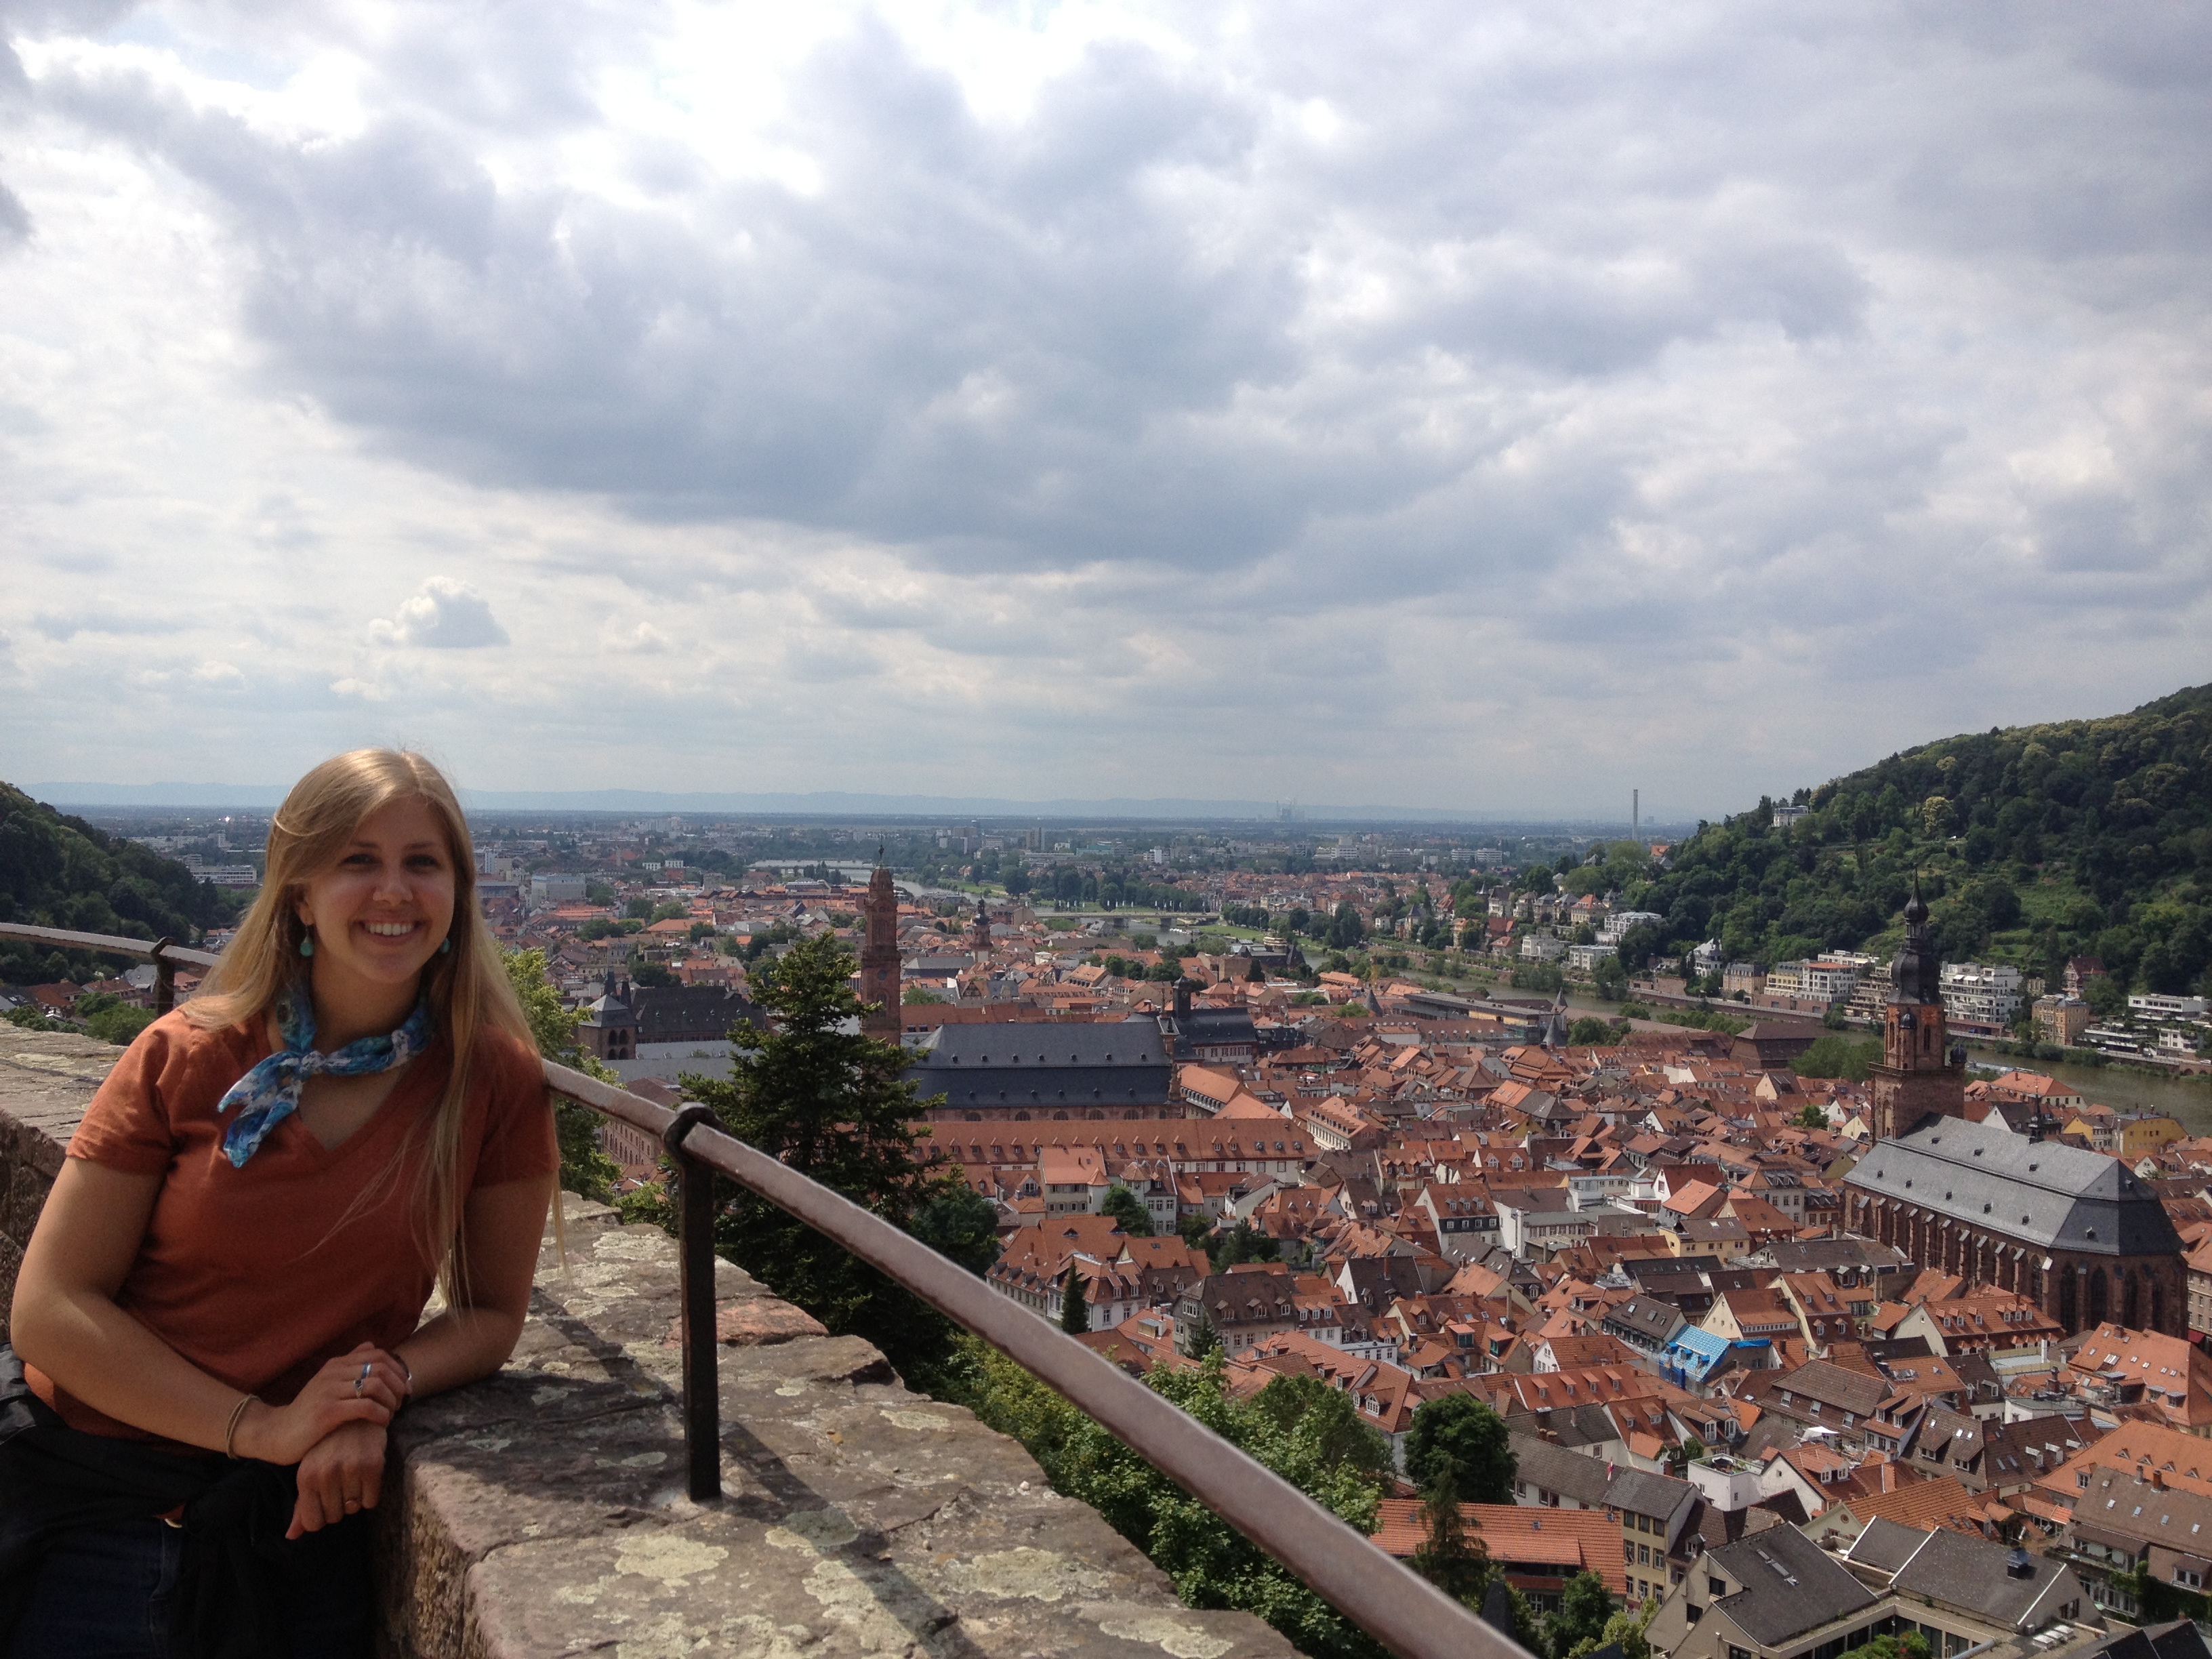 Romy Franks traveled to Germany to do an internship and conduct research for her project on the side. (Romy Franks)